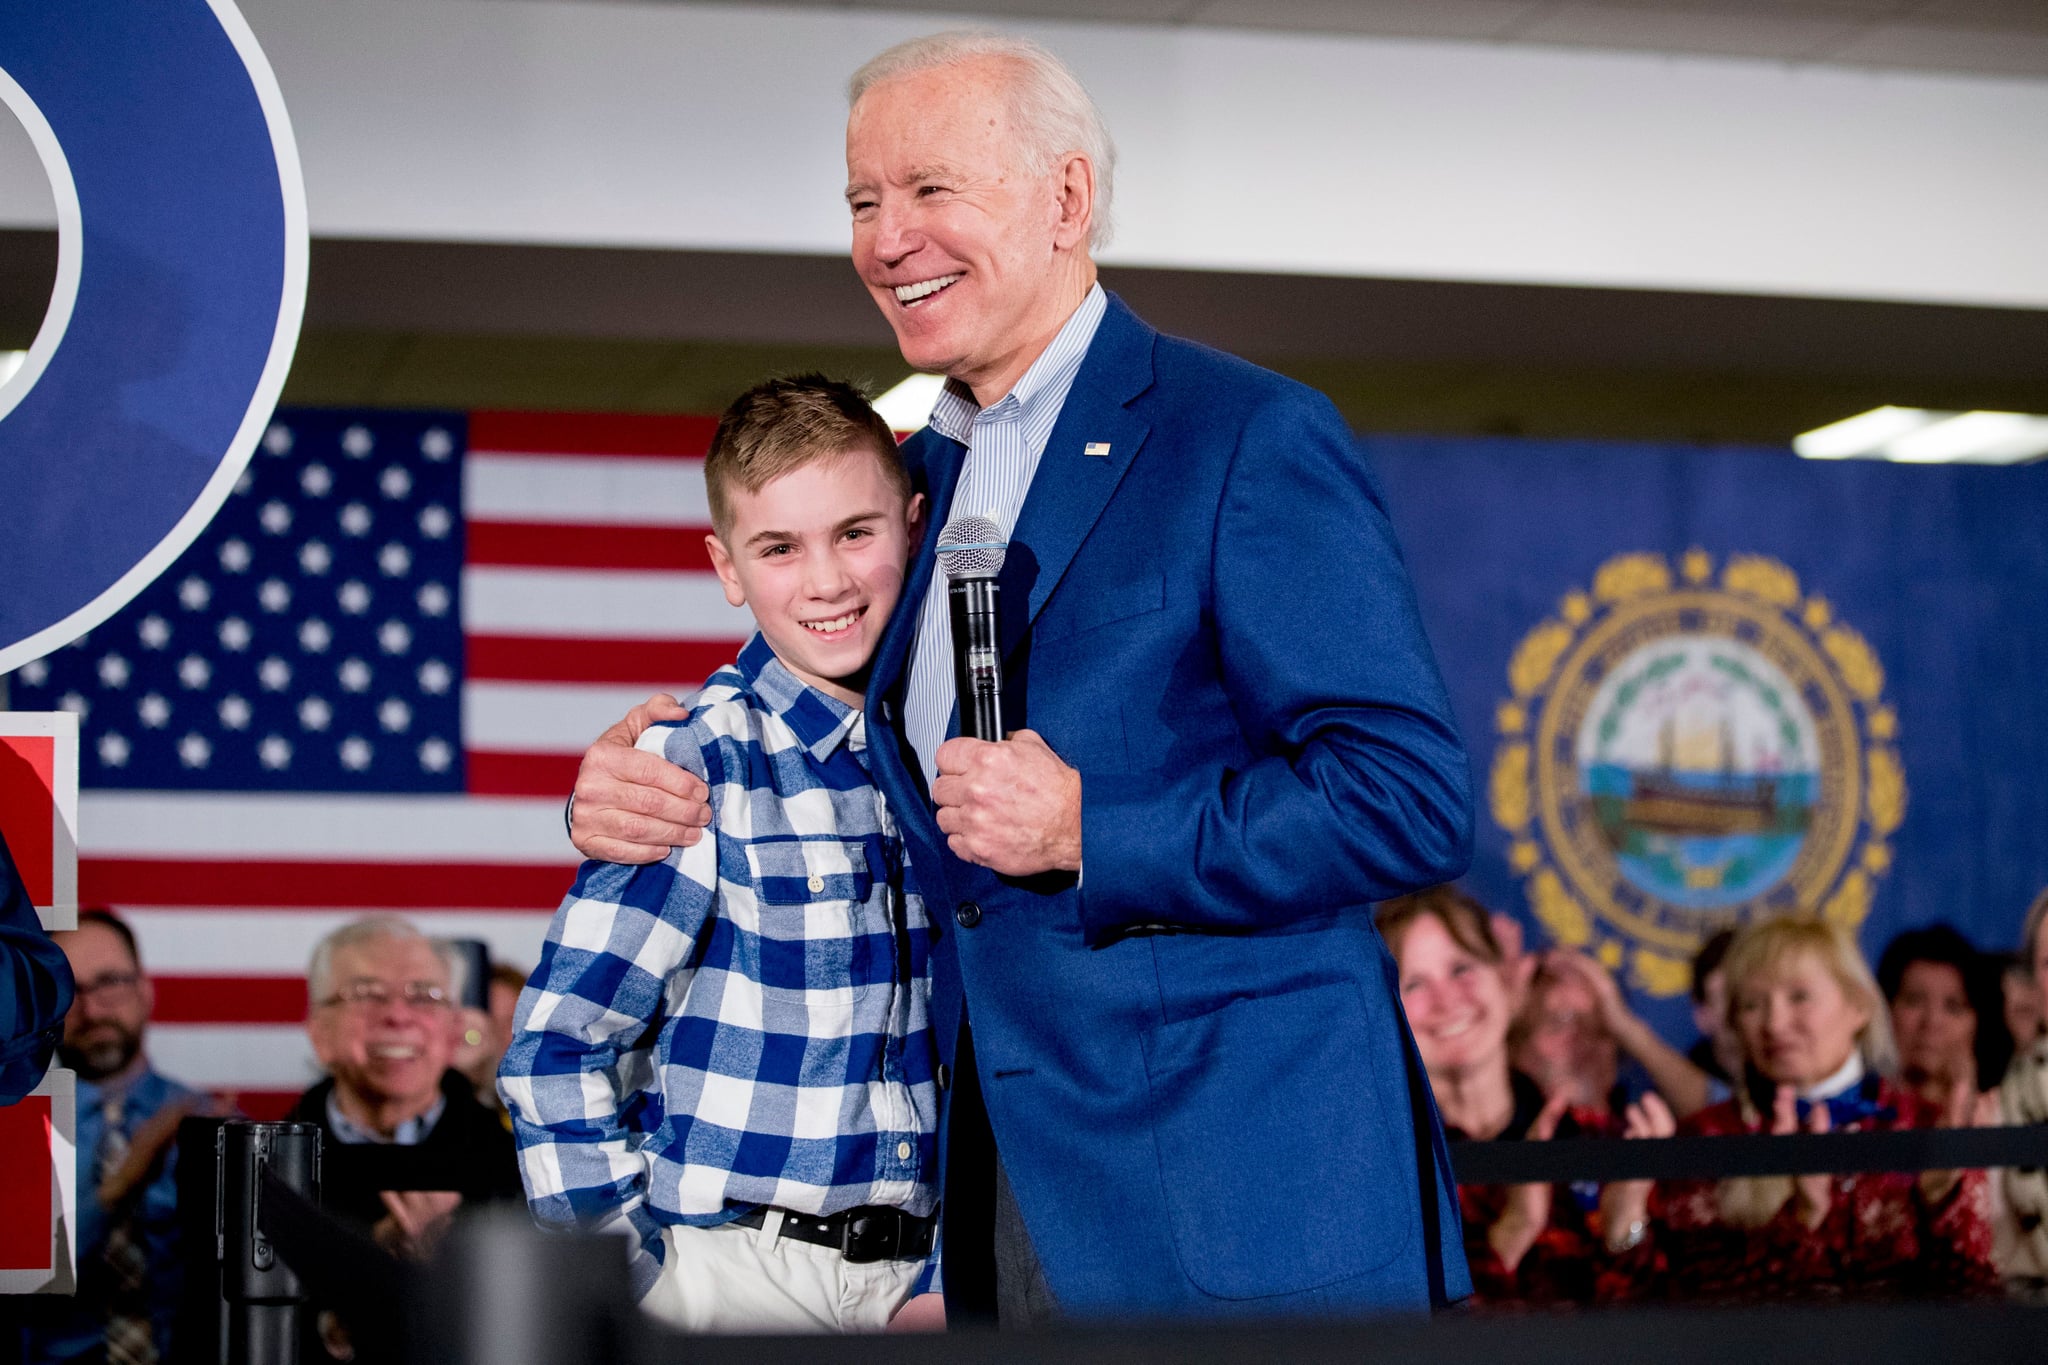 Mandatory Credit: Photo by Andrew Harnik/AP/Shutterstock (10553134a)Joe Biden, Brayden Harrington. Democratic presidential candidate former Vice President Joe Biden hugs Brayden Harrington, 12, at a campaign stop at Cilford Community Curch, in Gilford, N.H. Biden and Harrington have spoken to each other about their stutter they have both struggled withElection 2020 Joe Biden, Gilford, USA - 10 Feb 2020